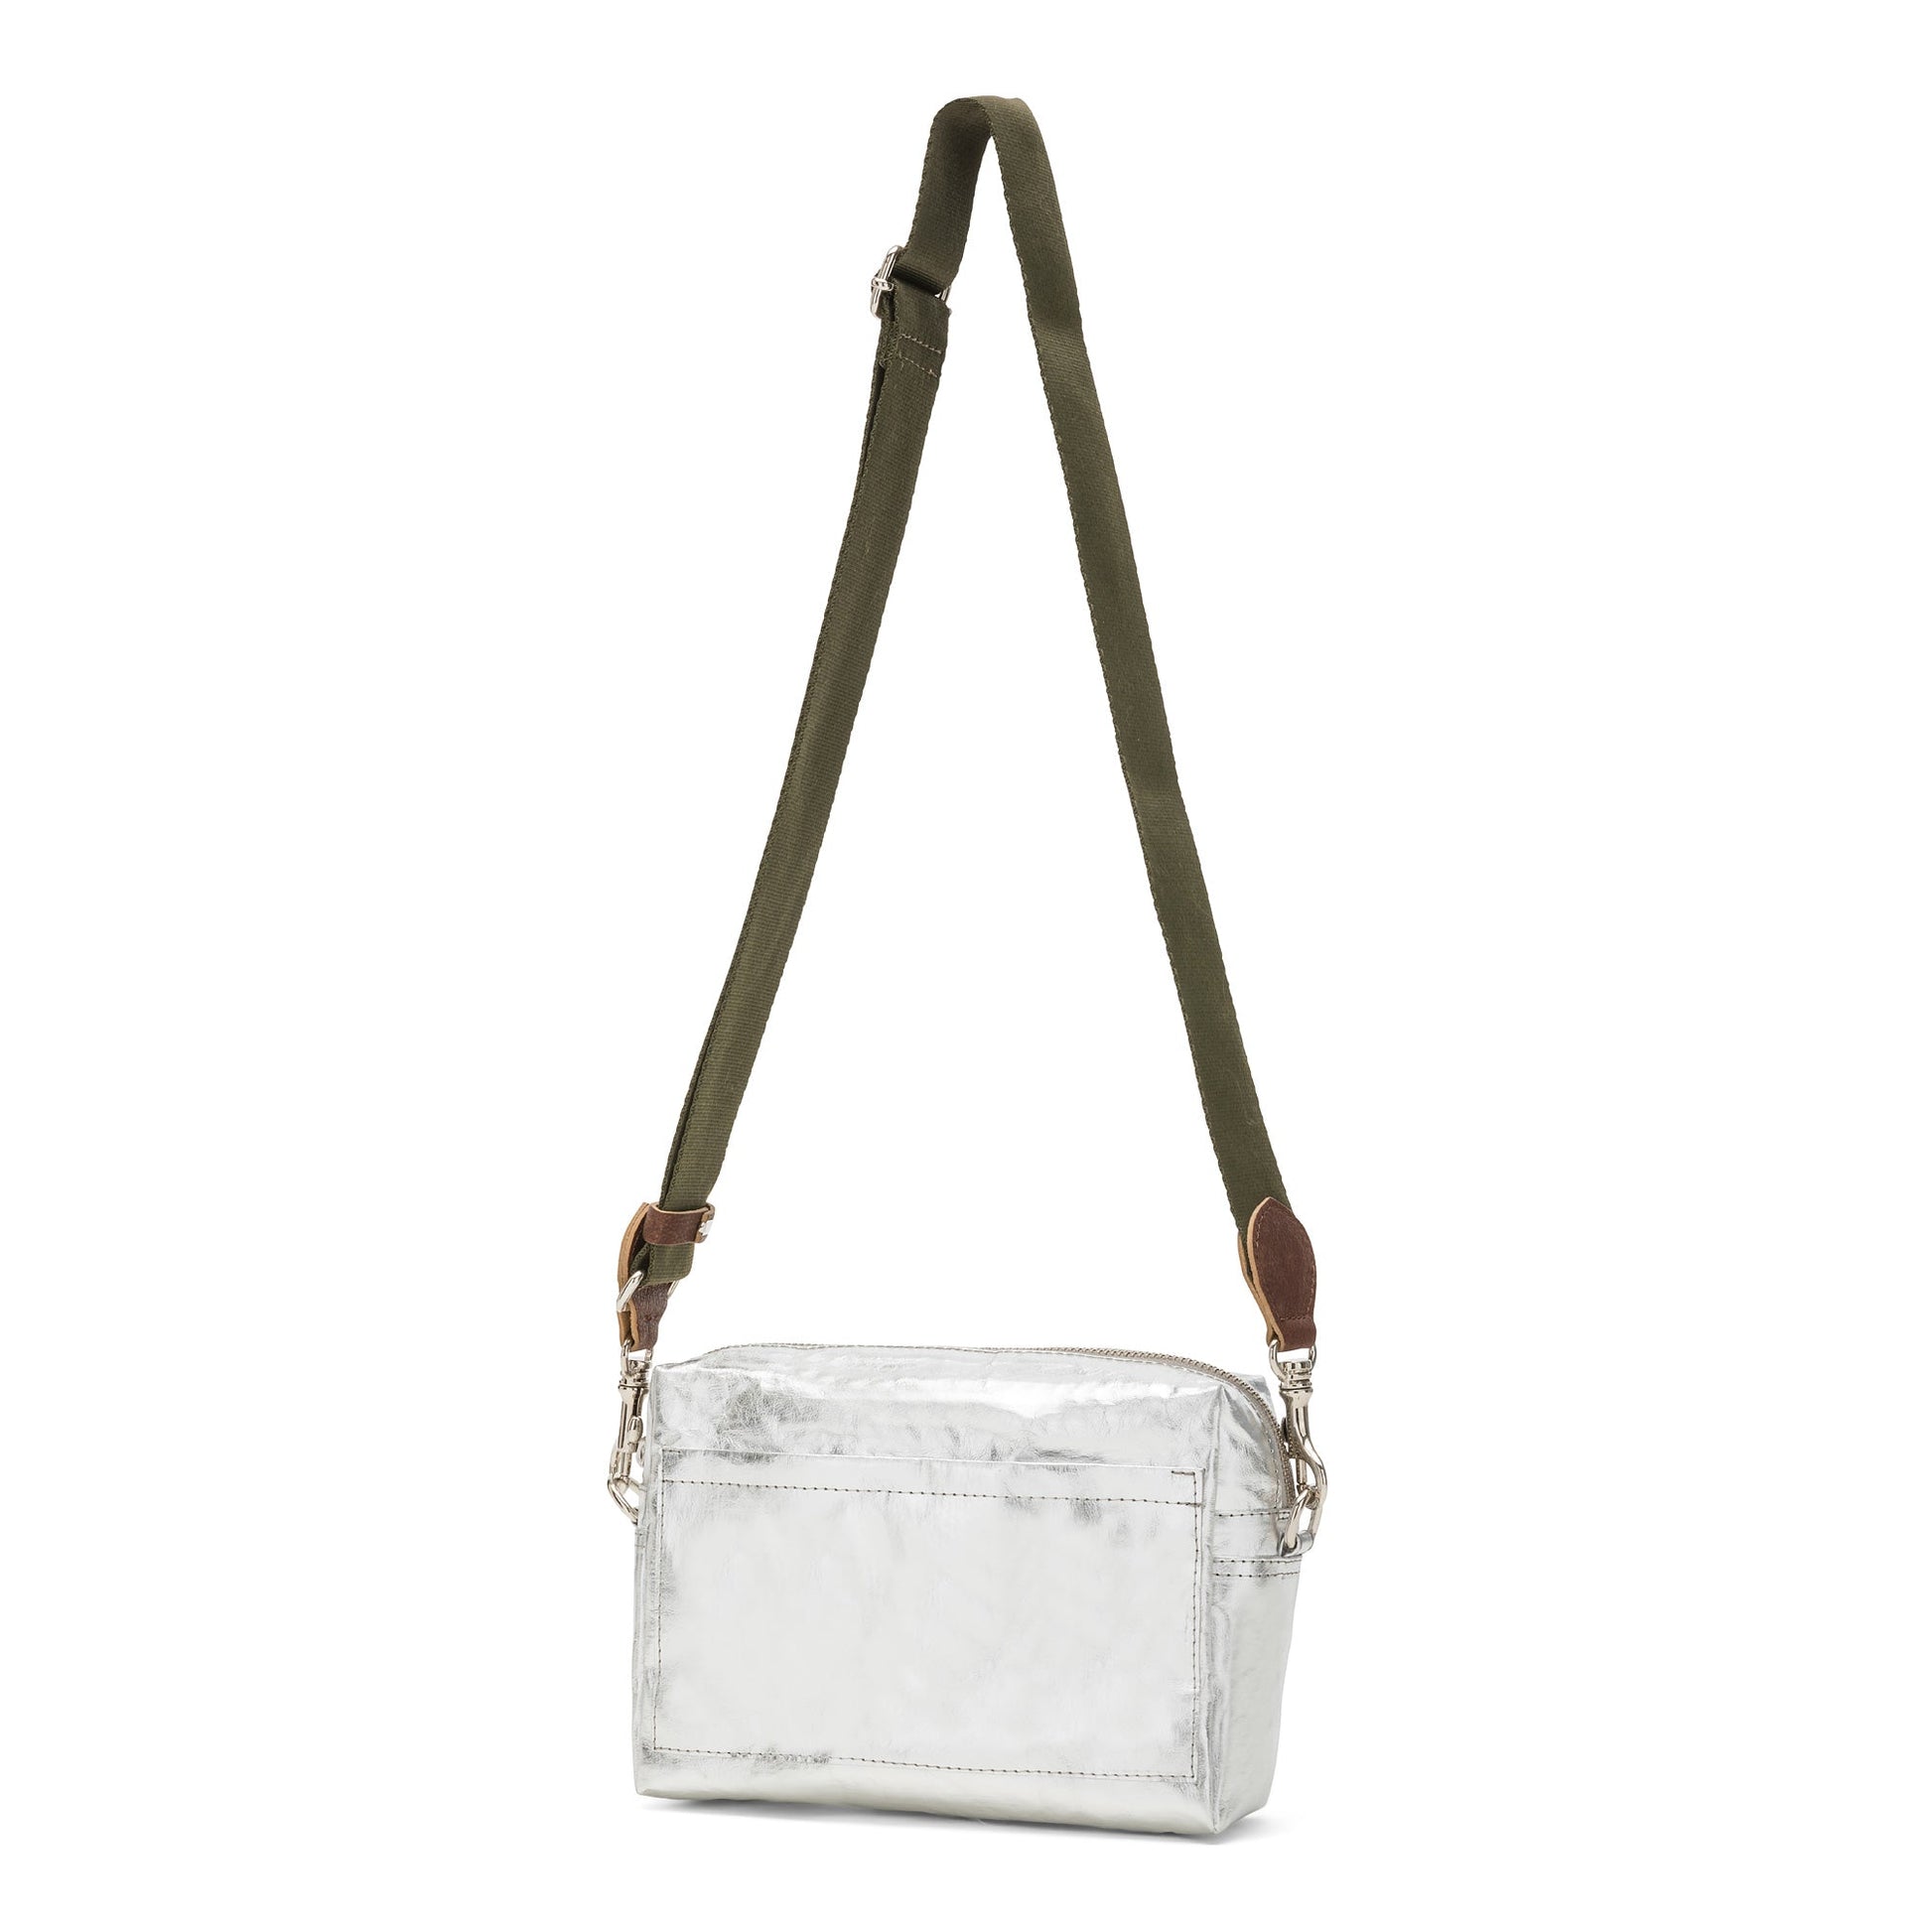 A rectangular washable paper handbag with an external side pocket is shown. The bag has a canvas strap, washable paper details and metal fastening clips to attach the straps to the bag. The bag closes by a zip. The bag shown is metallic silver with an olive strap.